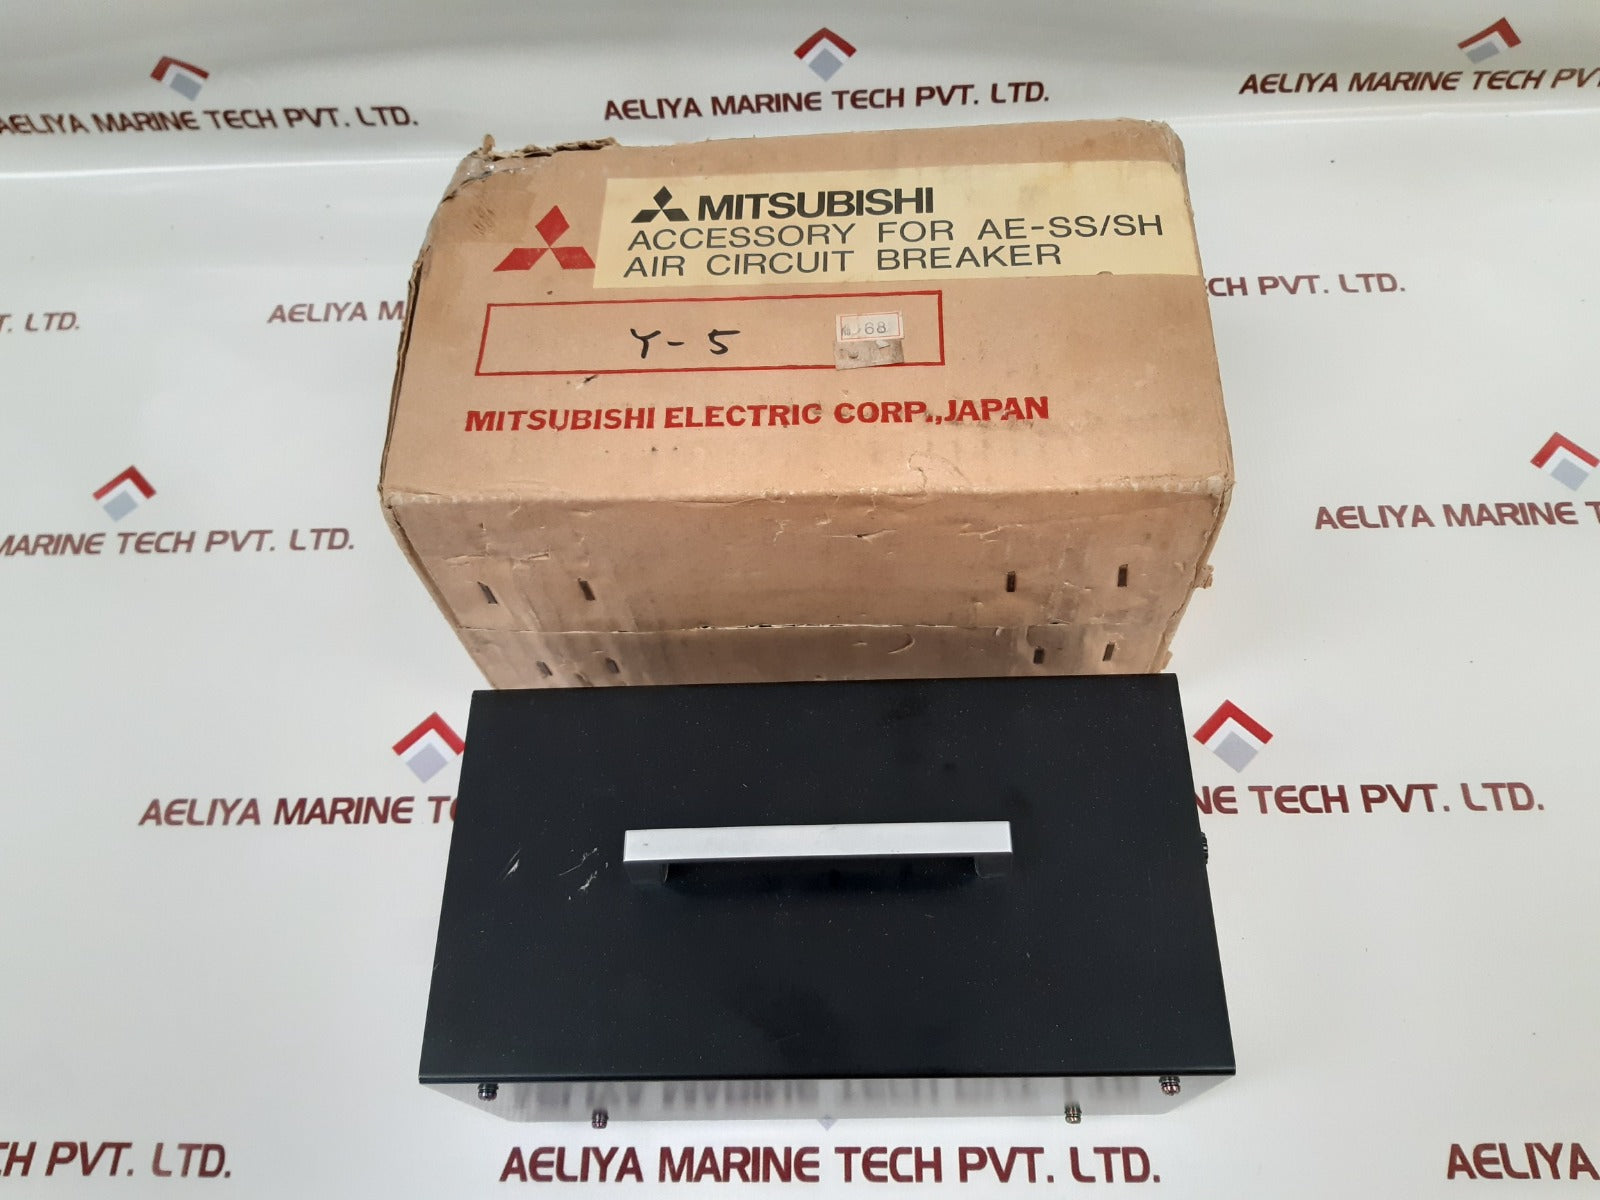 Mitsubishi 5A Adapter Y-5 Accessory For Ae-ss/Sh Air Circuit Breaker